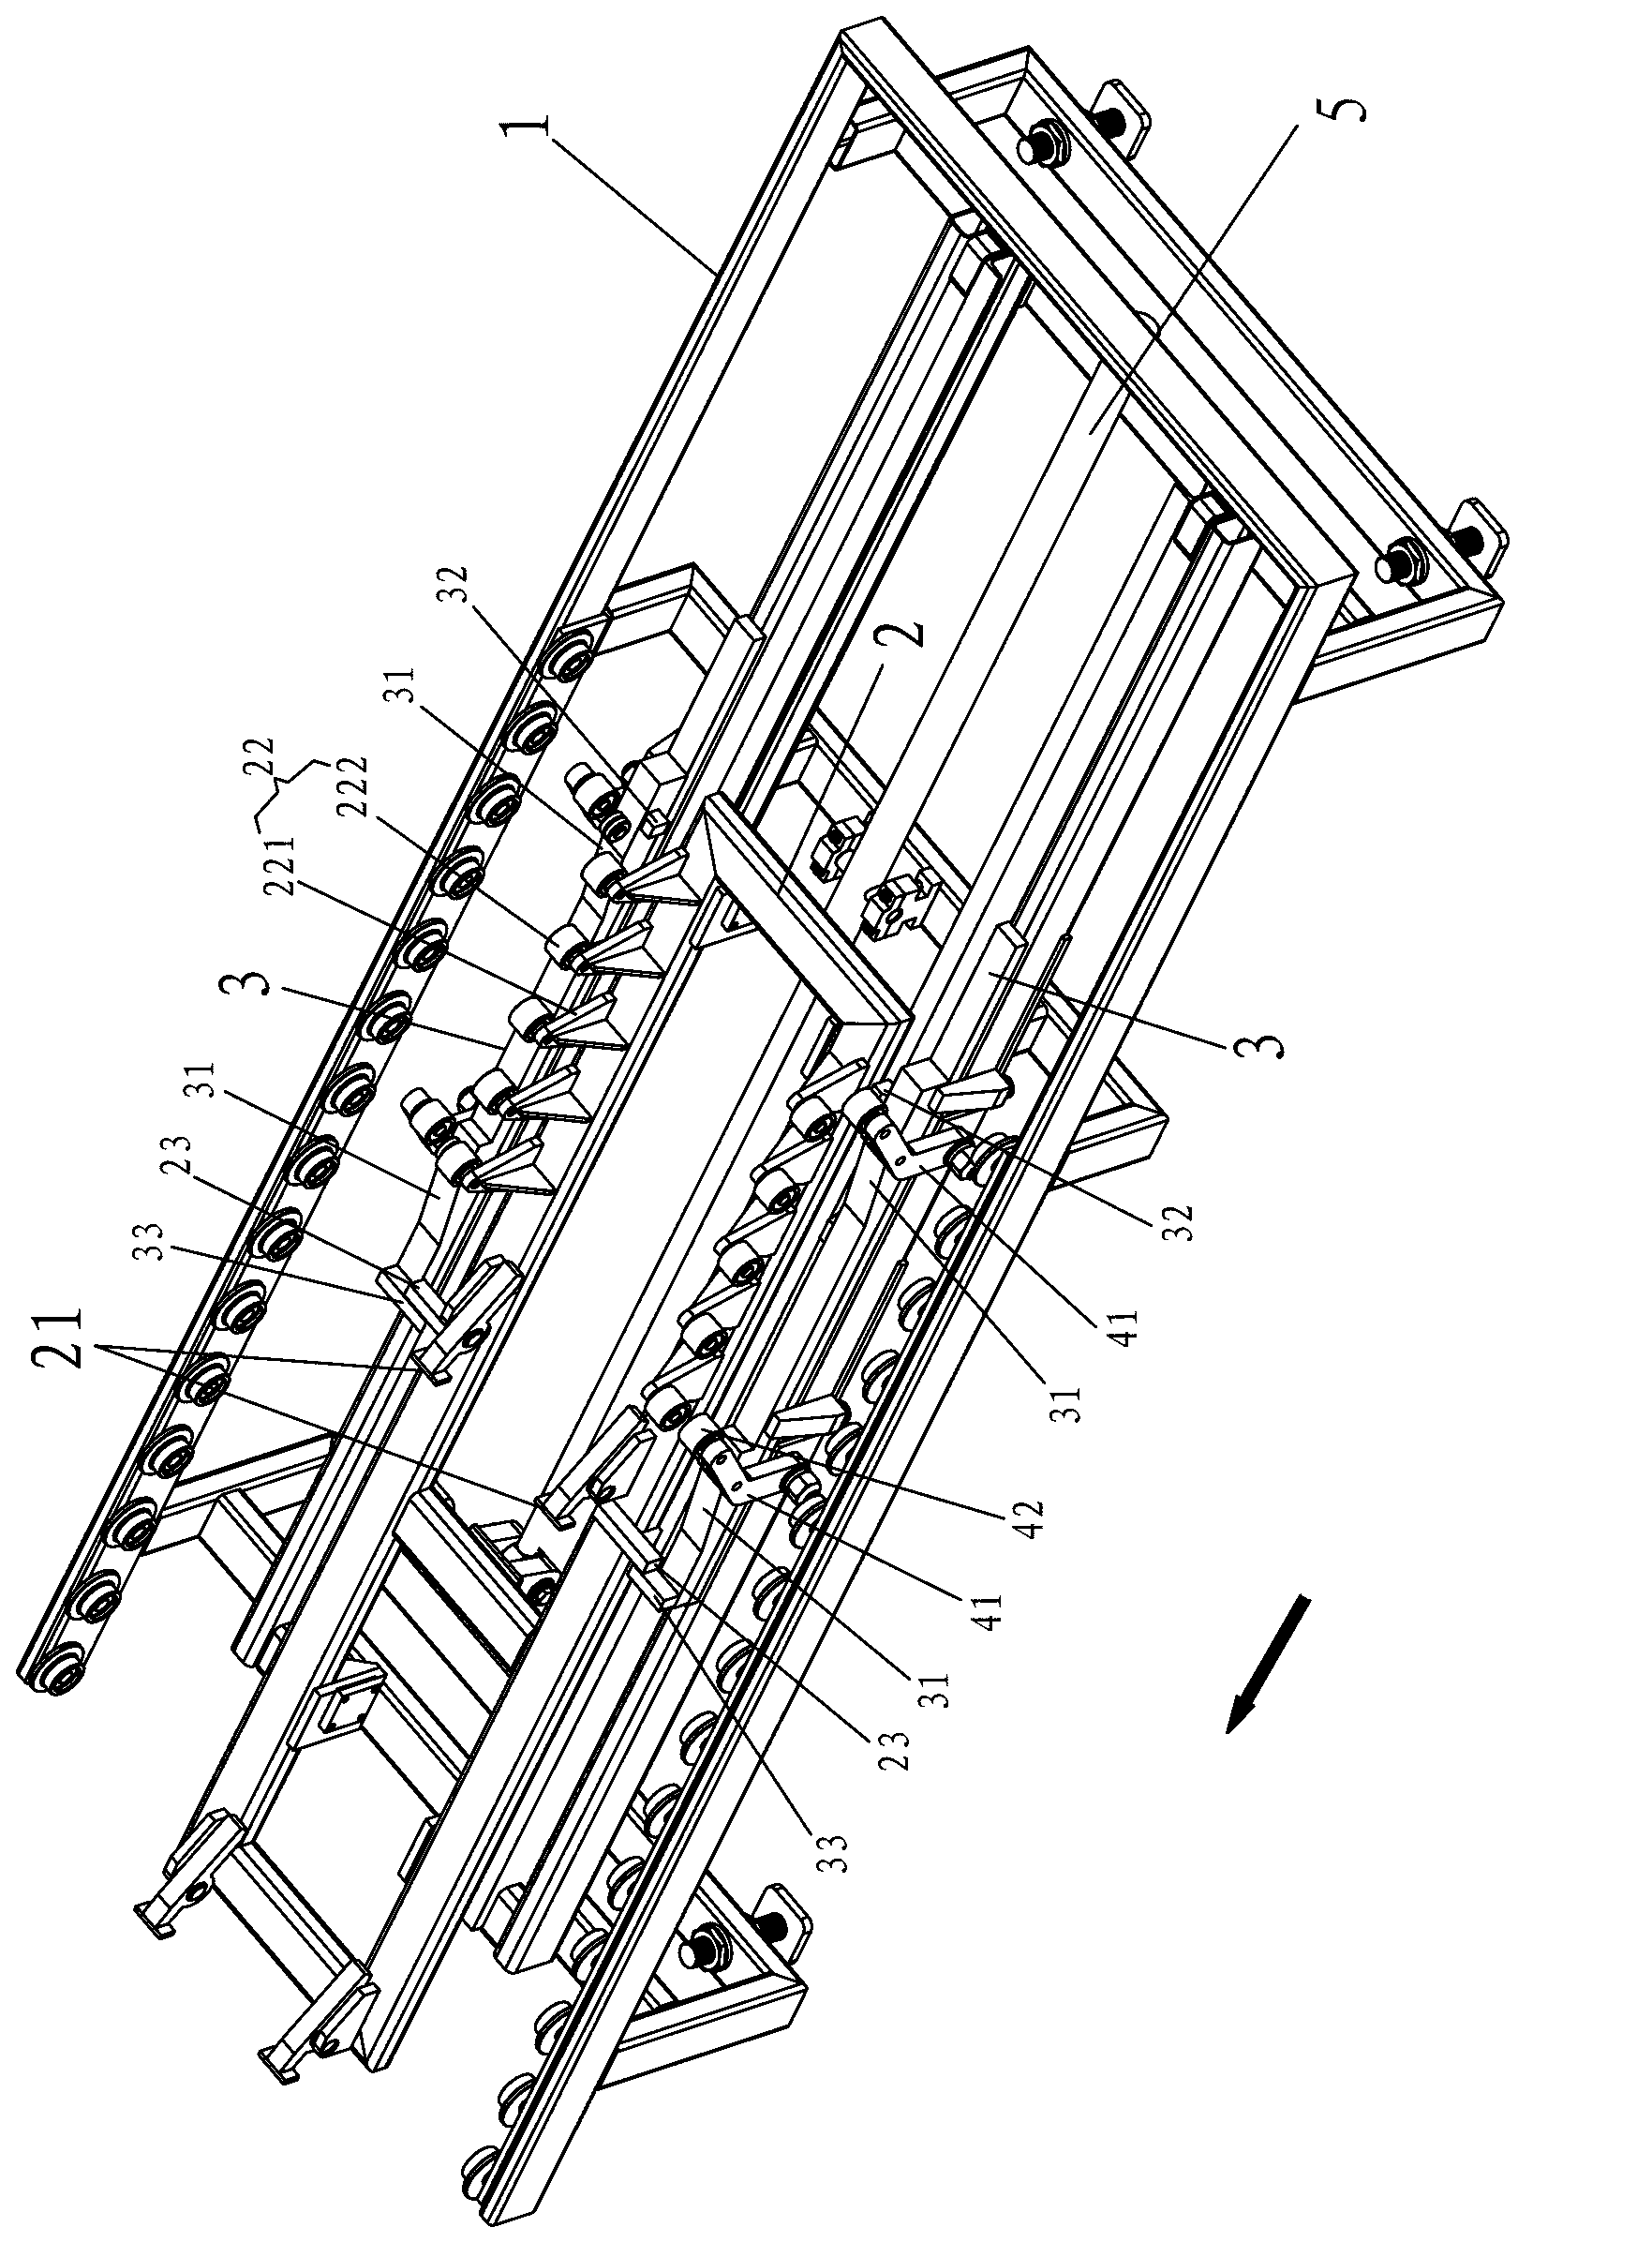 Tray separation device